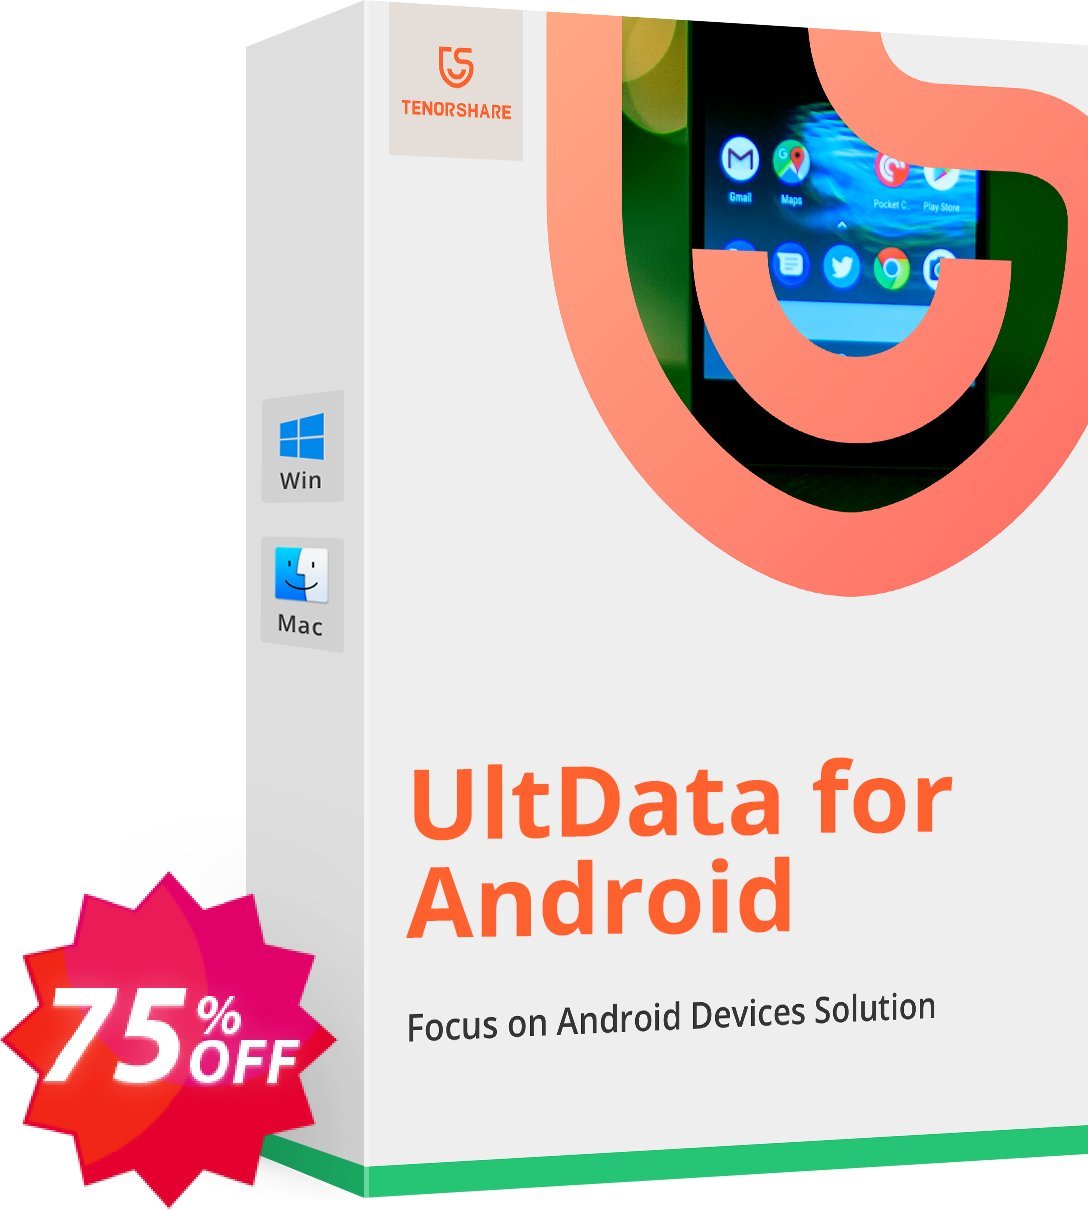 Tenorshare UltData for Android Coupon code 75% discount 